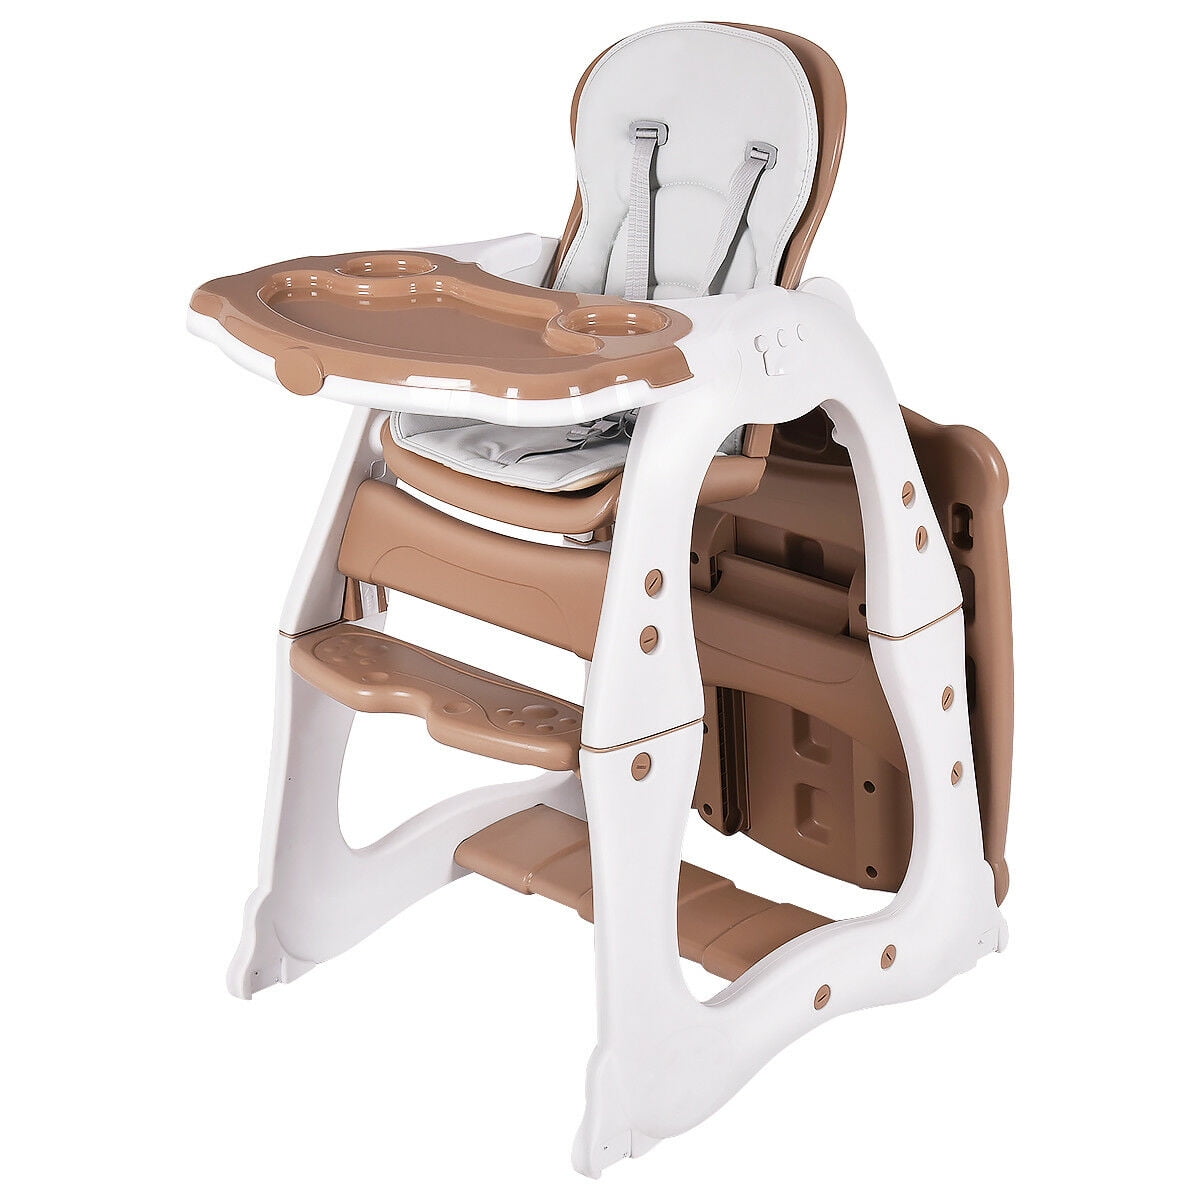 3 in 1 baby dining chair seat multifunctional kids child eating table highchairs 